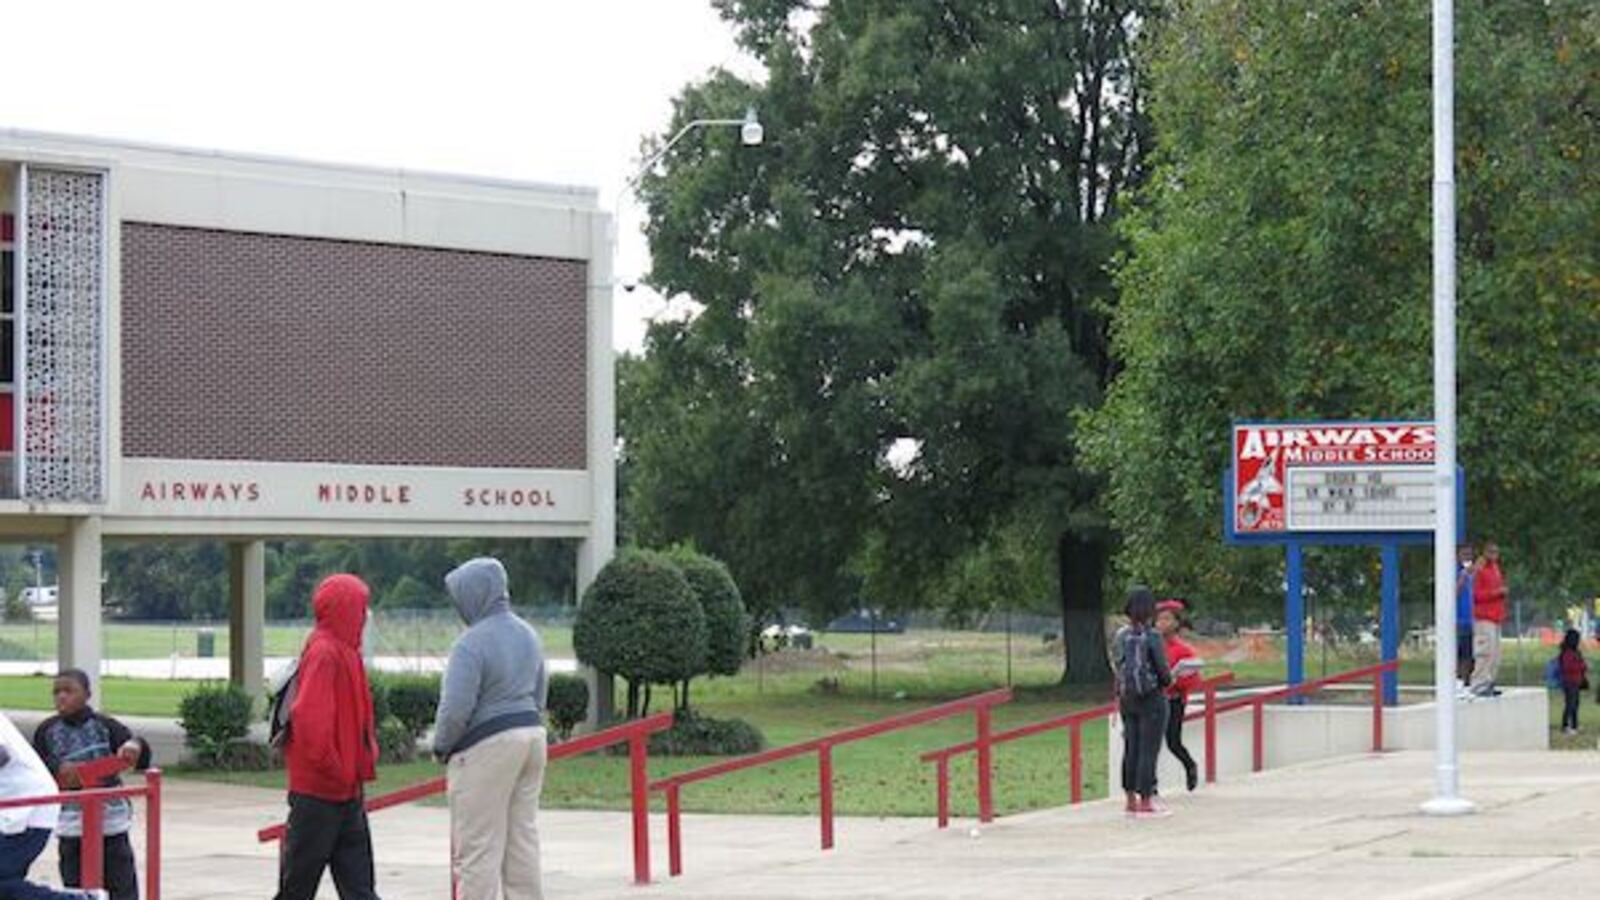 The Achievement School District tried to bring a new operator to Airways Middle School, a long-struggling school in Memphis.